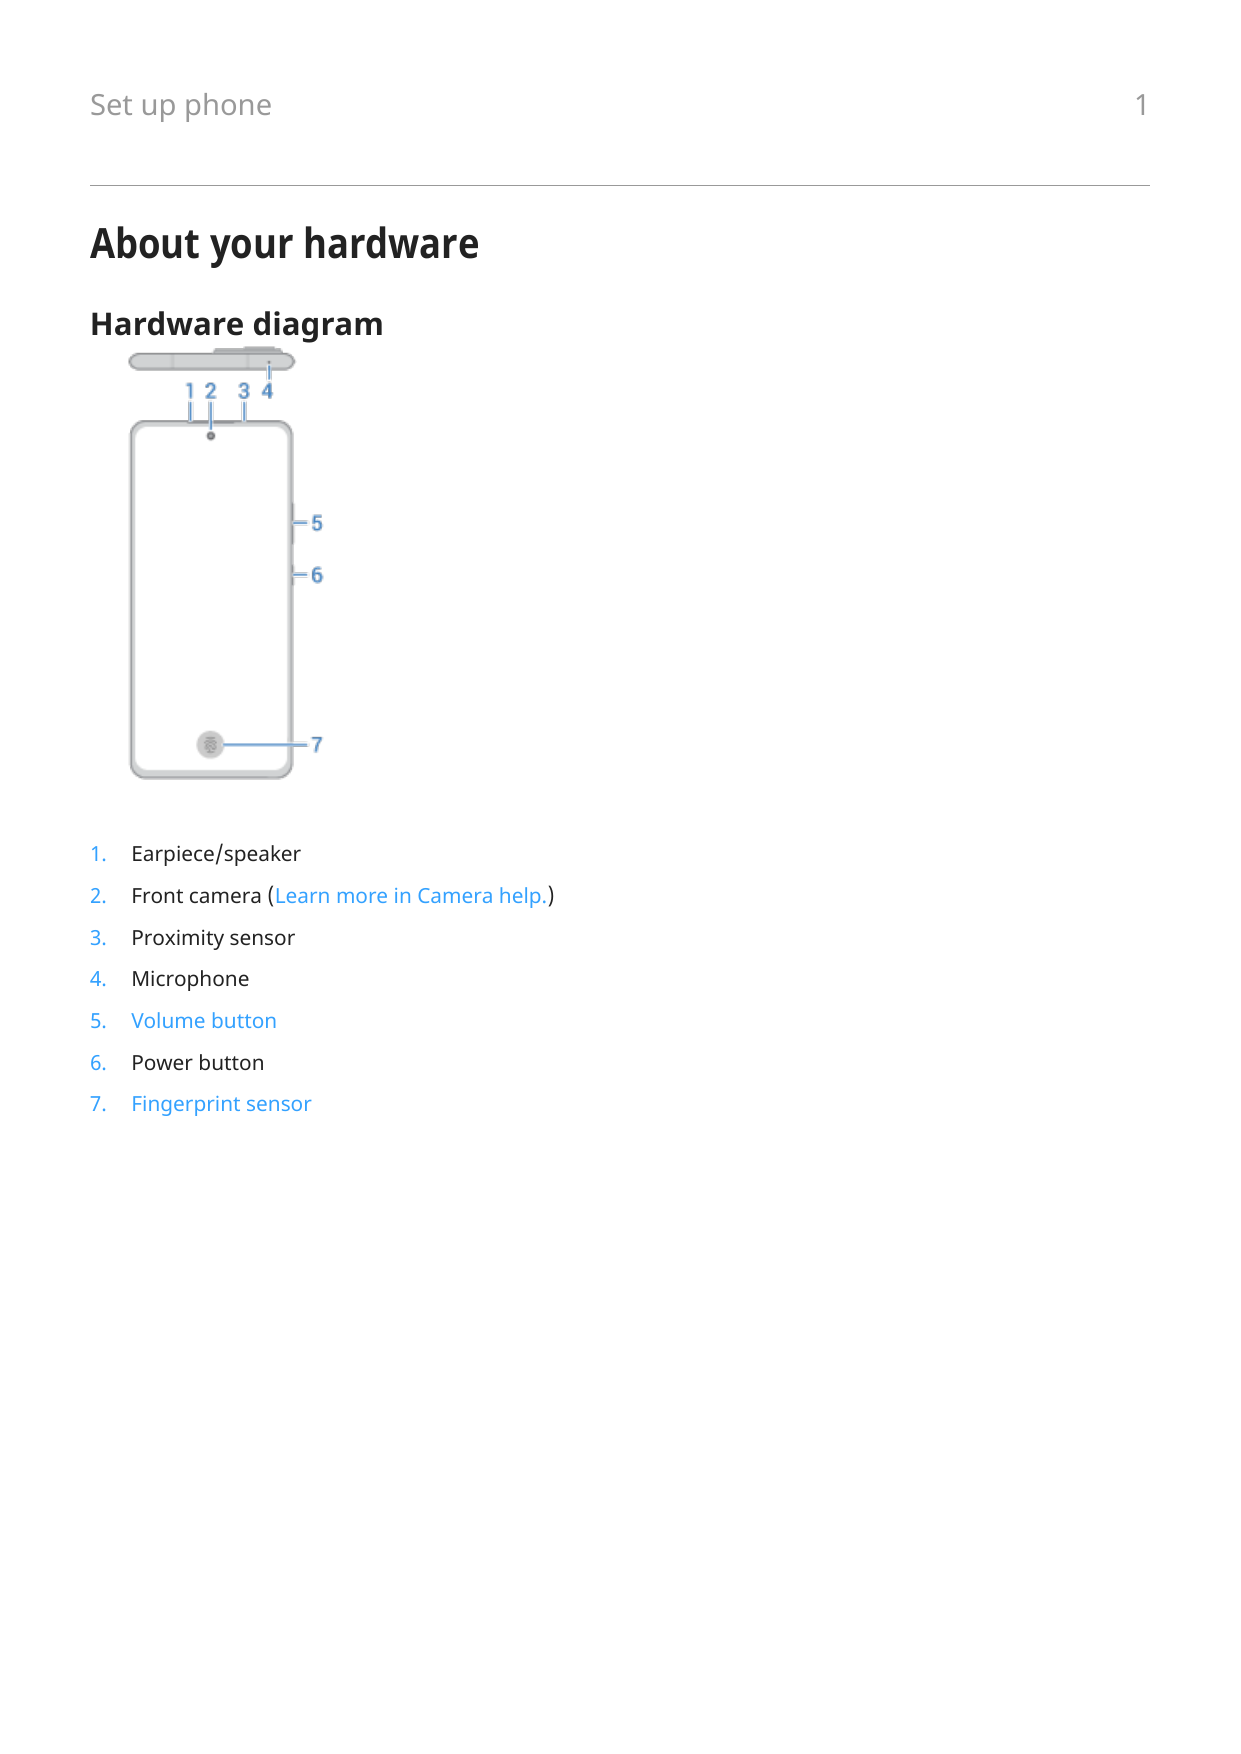 Set up phoneAbout your hardwareHardware diagram1.Earpiece/speaker2.Front camera (Learn more in Camera help.)3.Proximity sensor4.